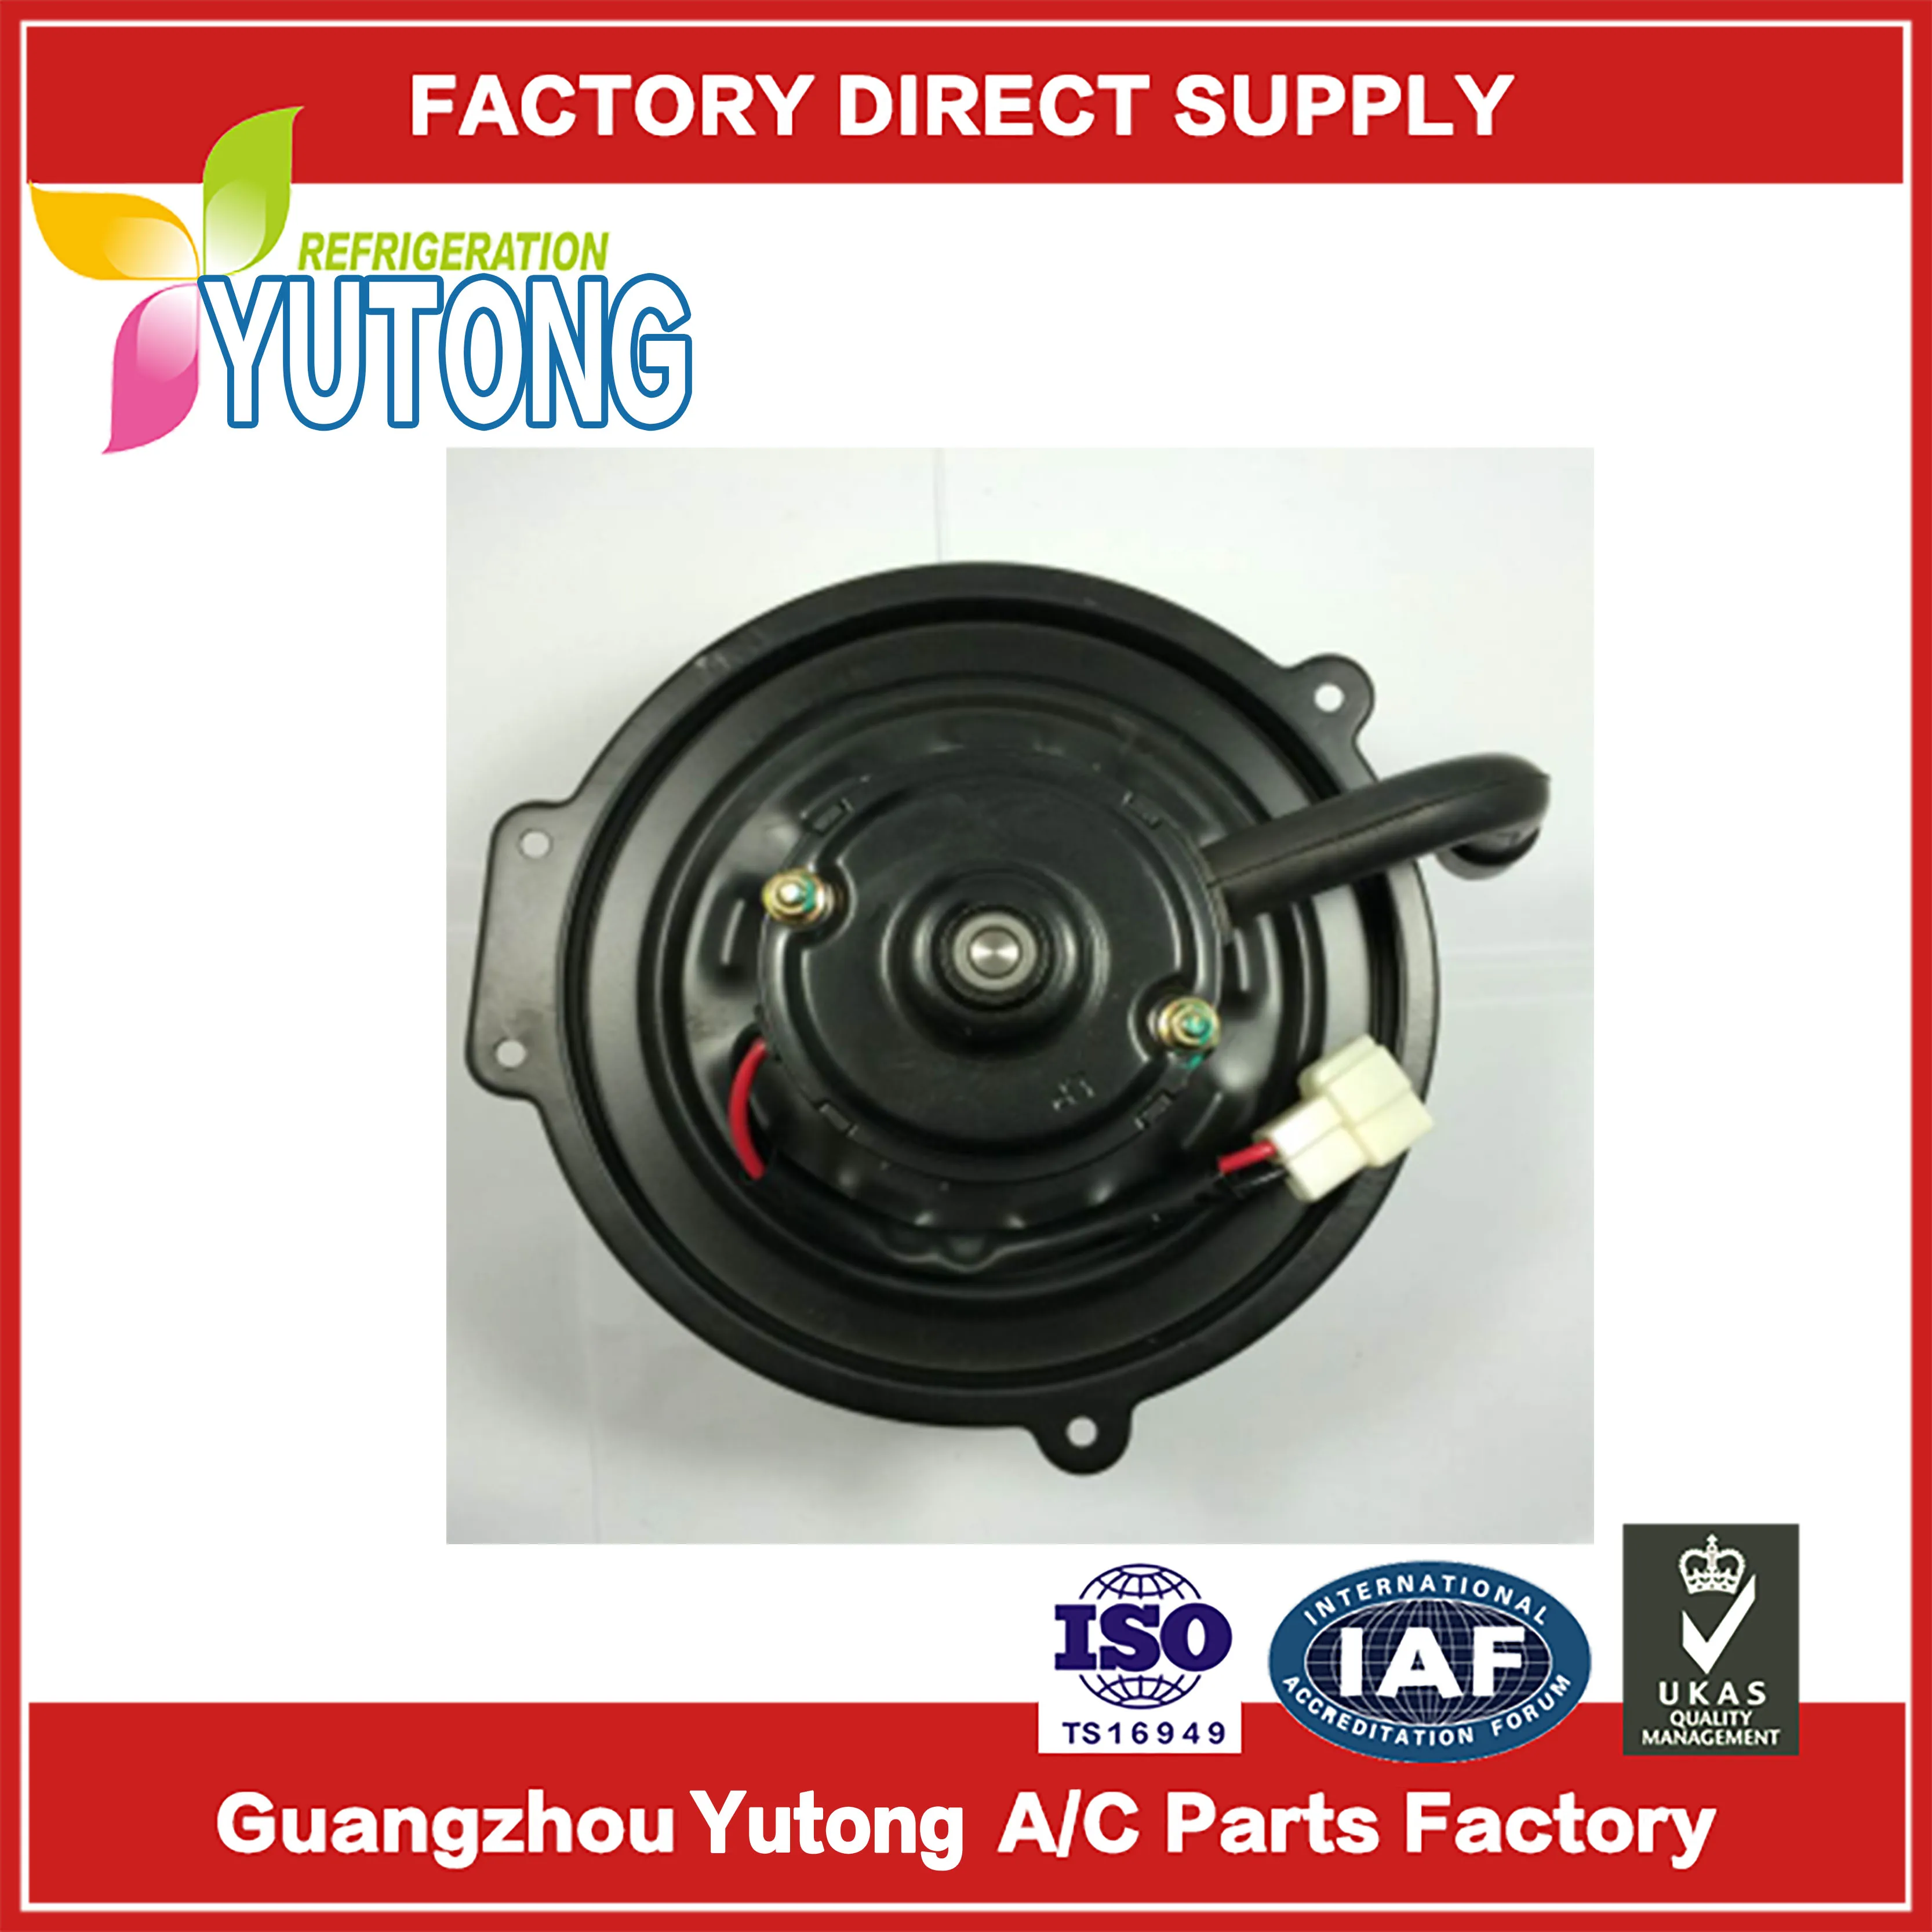 

LP60-45 Auto AC Blower Motor For NISSAN PICKUP